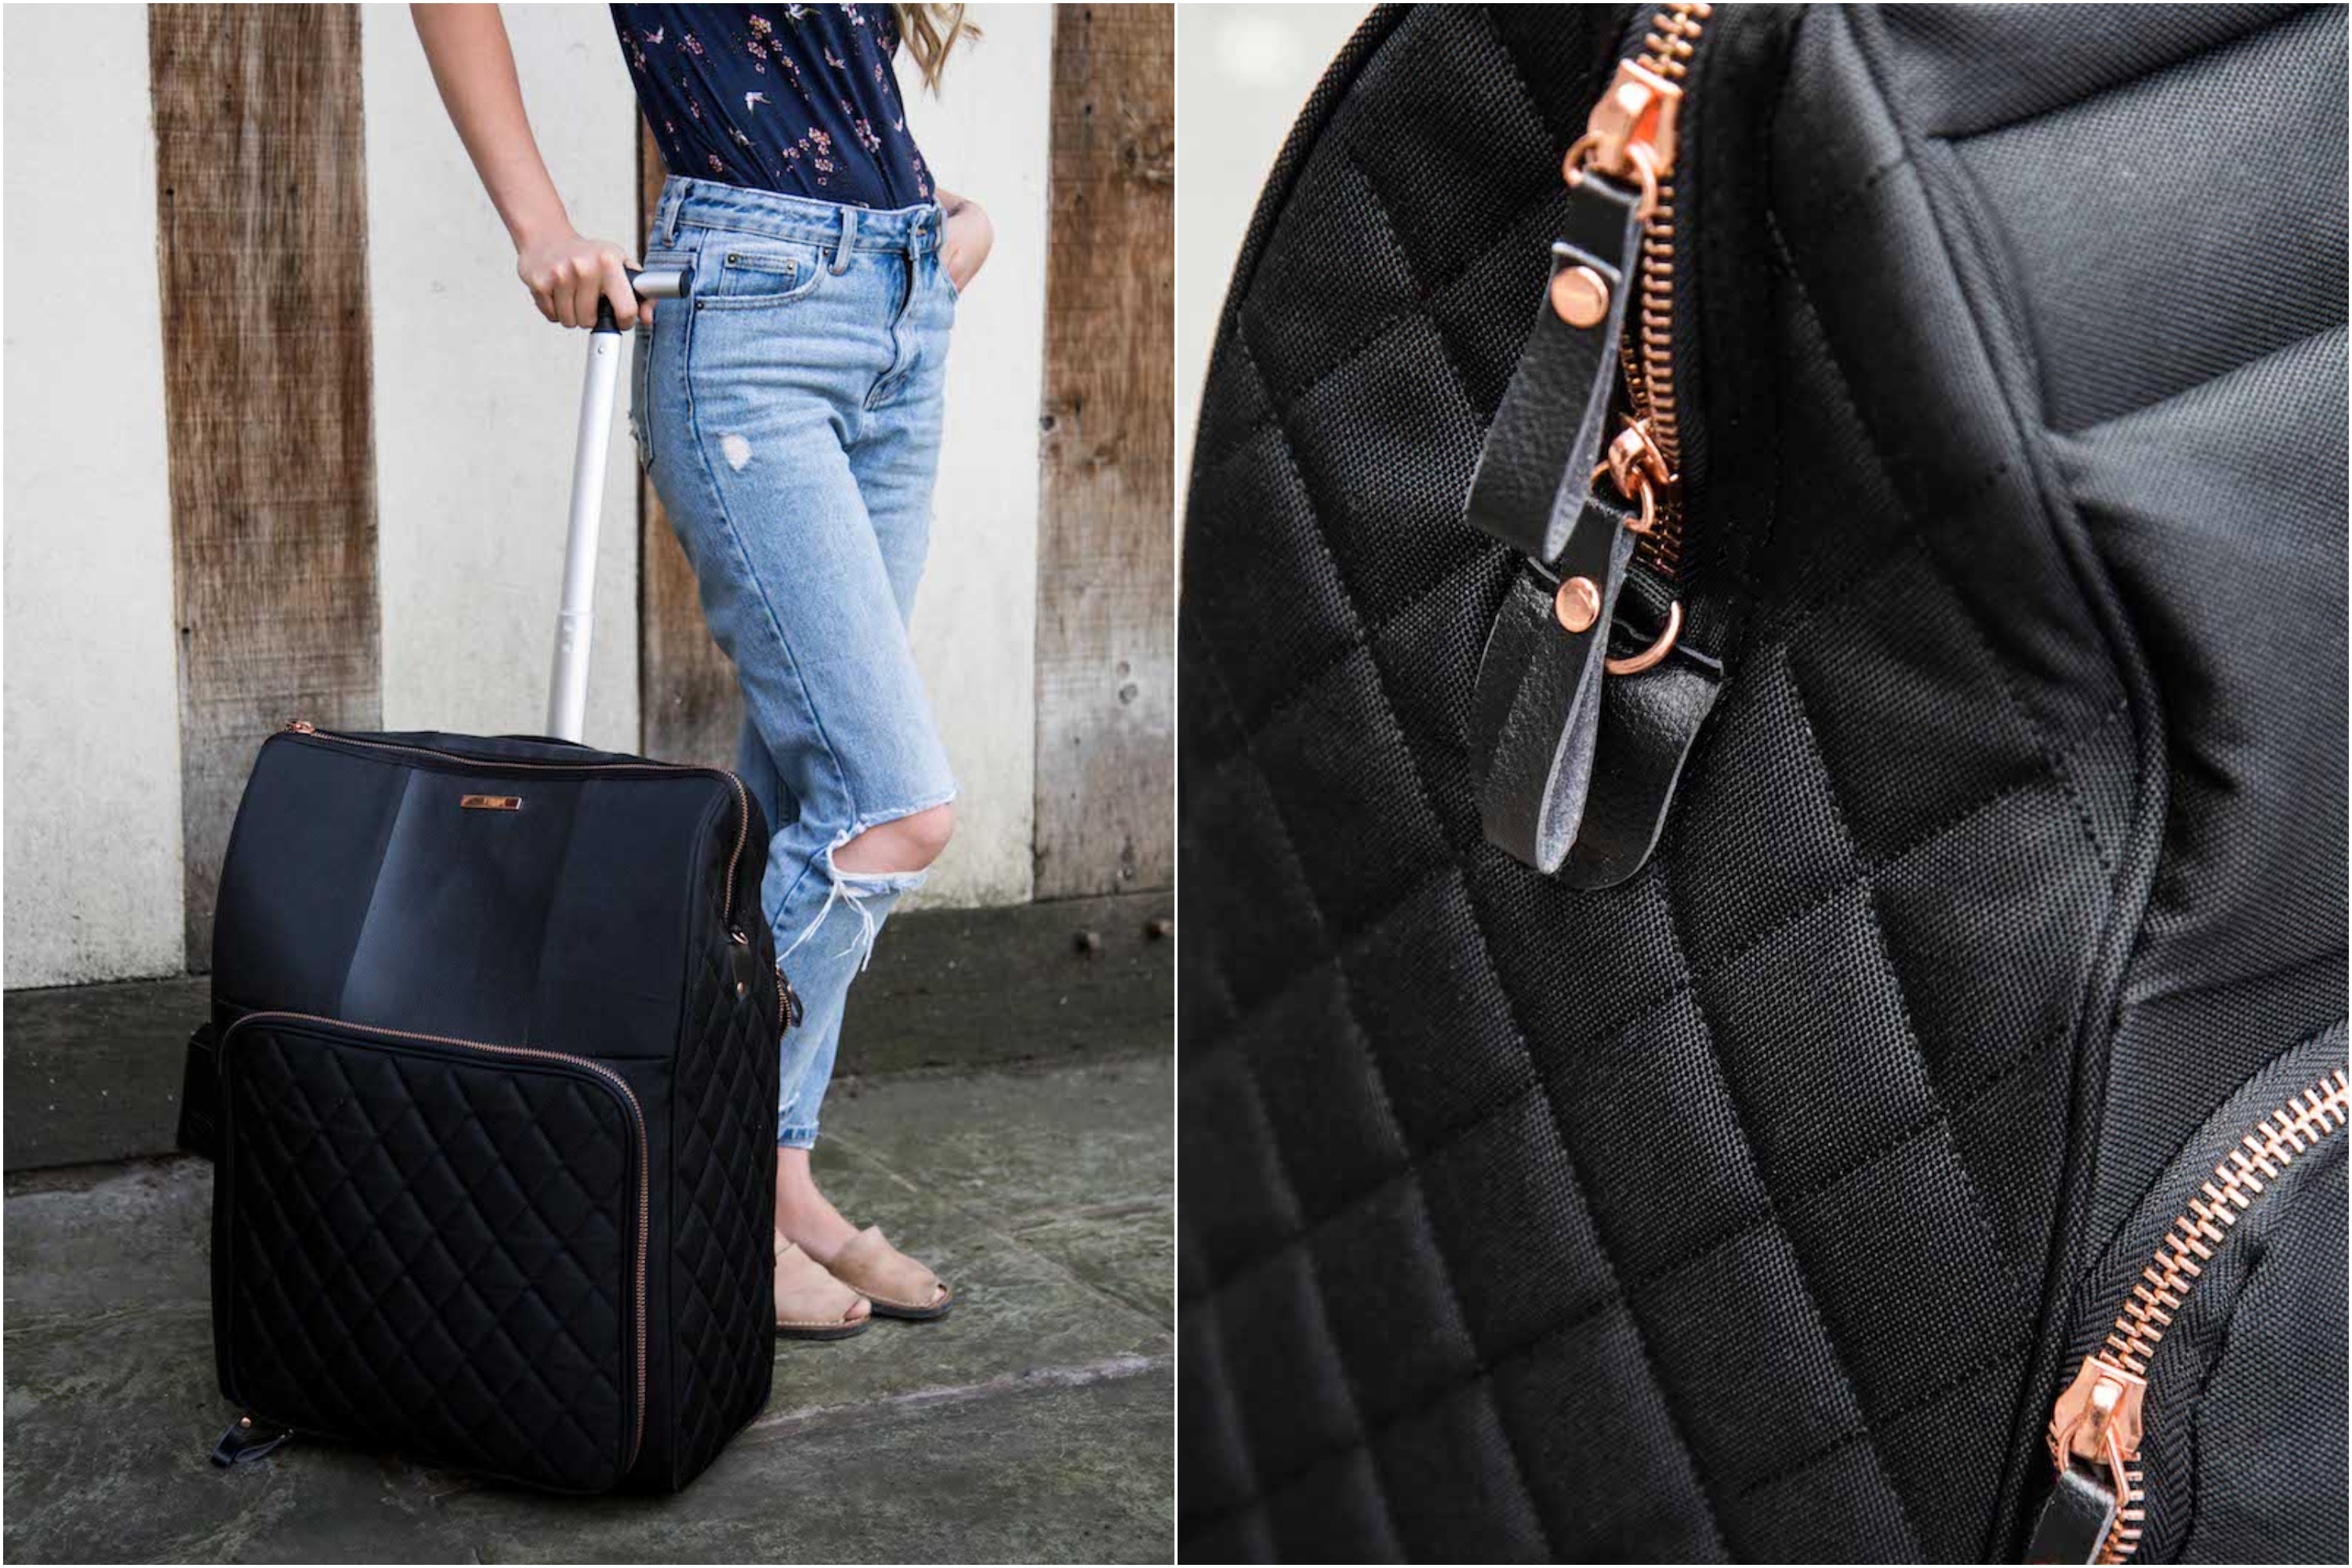 The Travel Hack Cabin Luggage cabin suitcase black and rose gold suitcase beautiful modern suitcase 15 Romantic Travel Gift Ideas for Valentine's Day